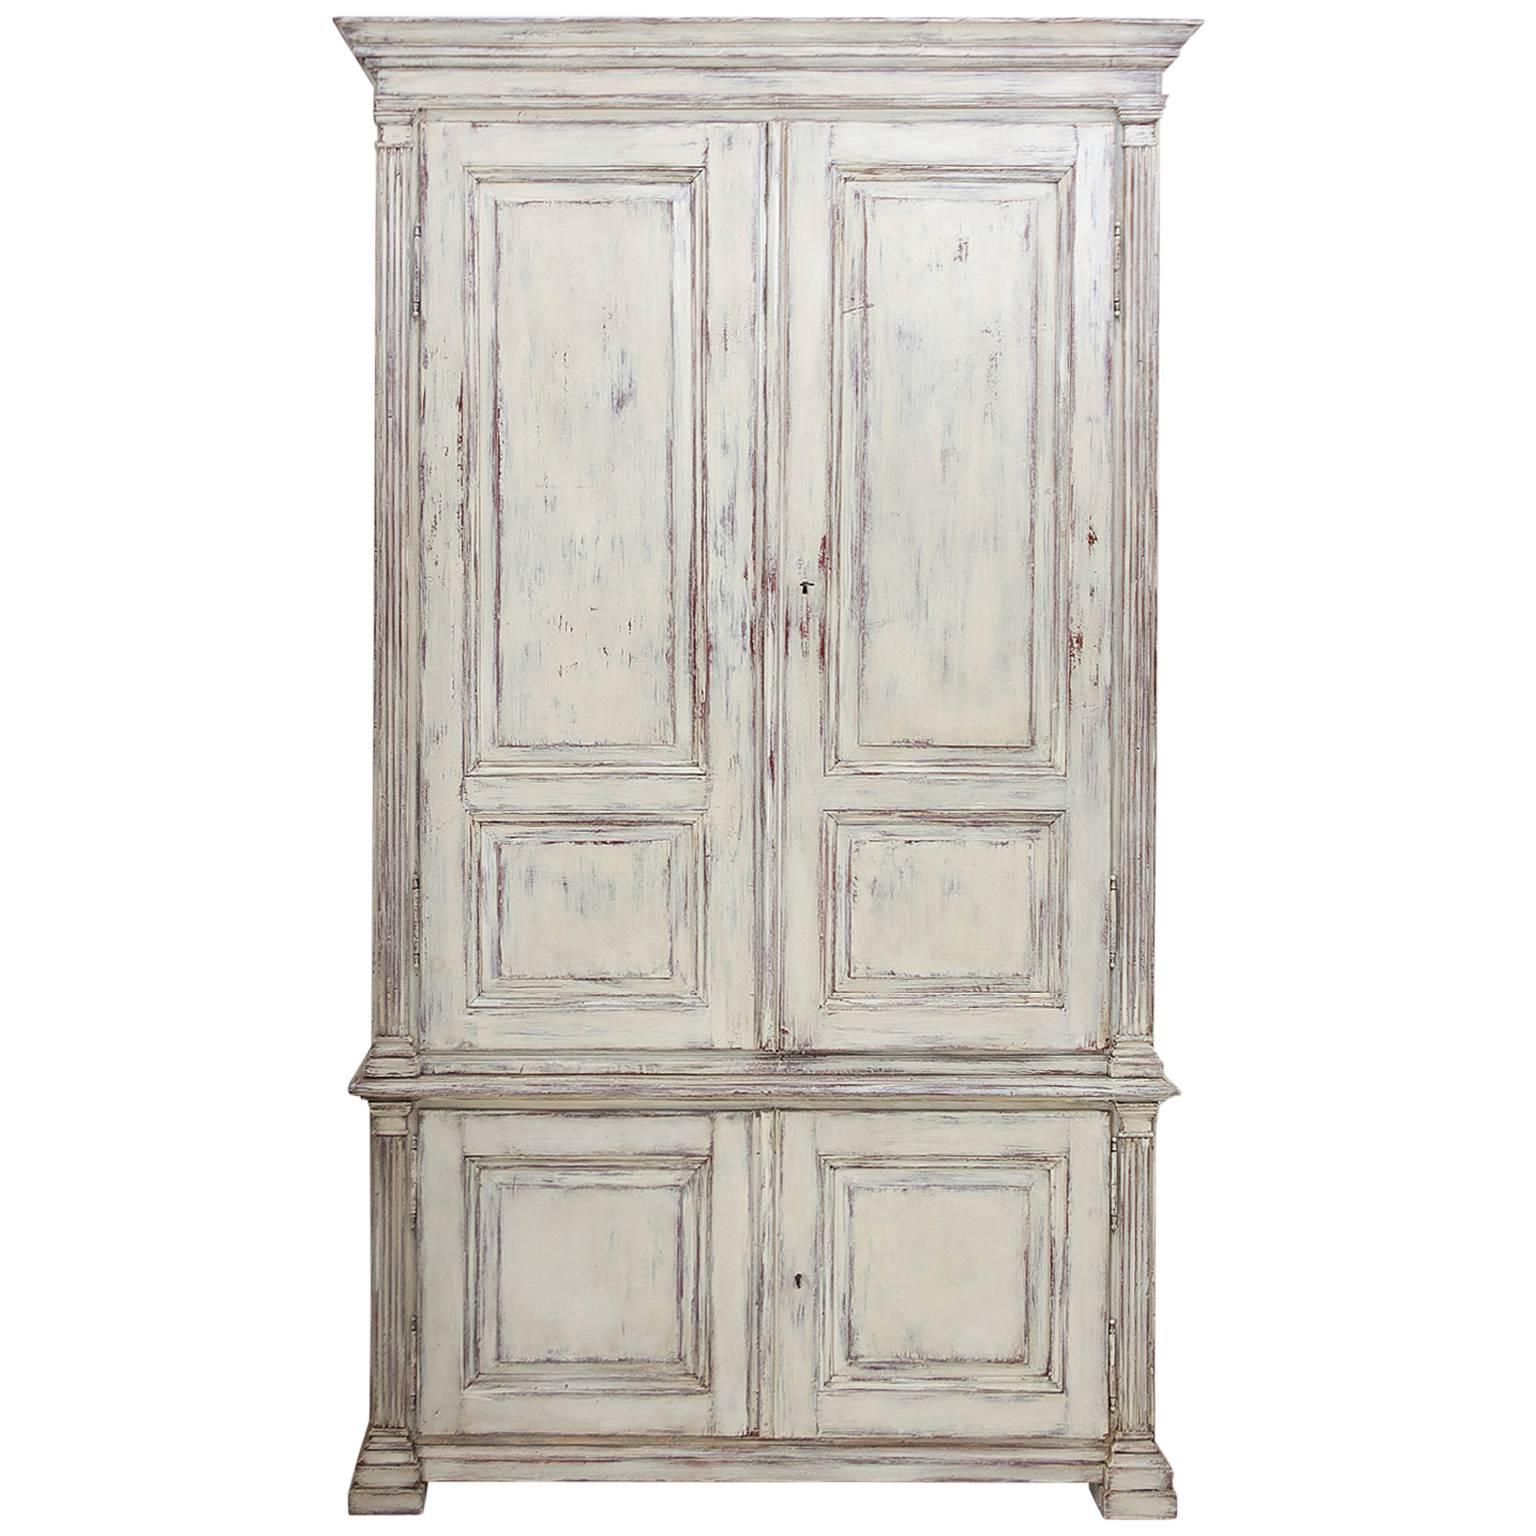 Painted Swedish Armoire with Raised Panels and Fluted Pilasters, circa 1850